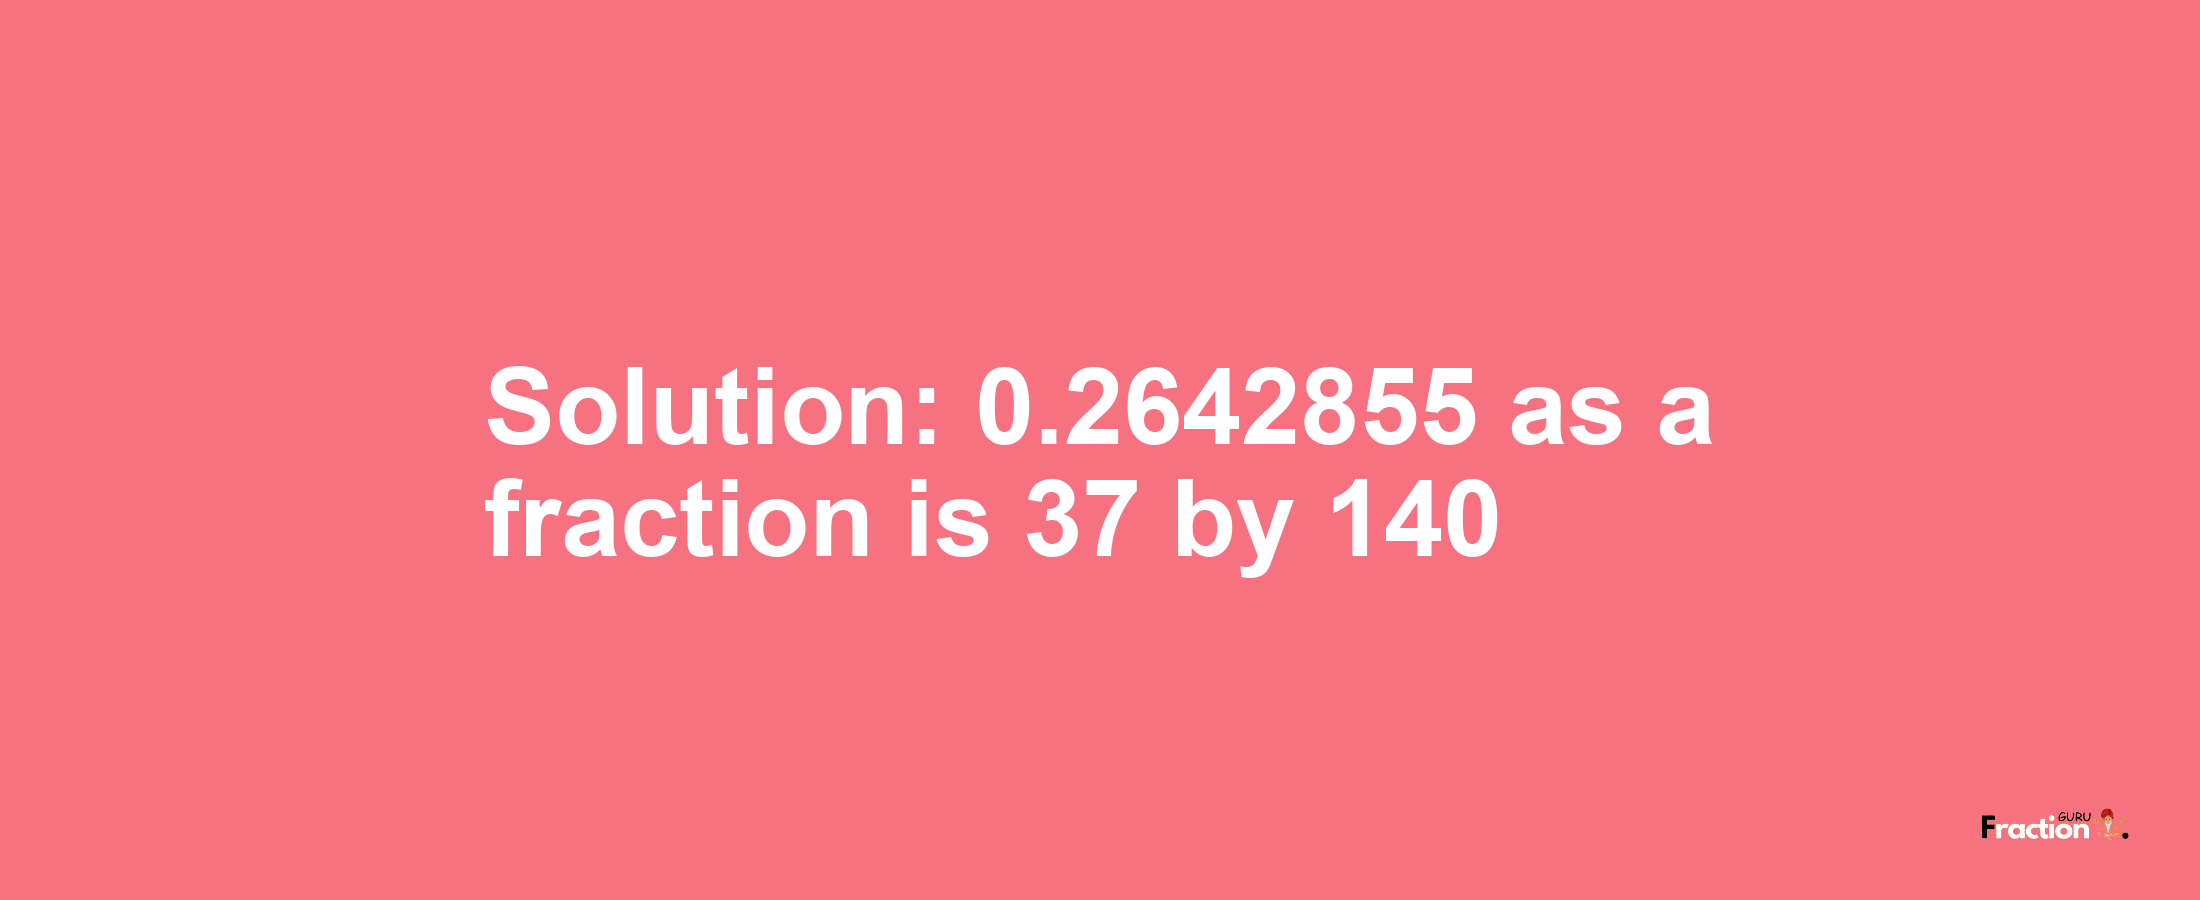 Solution:0.2642855 as a fraction is 37/140